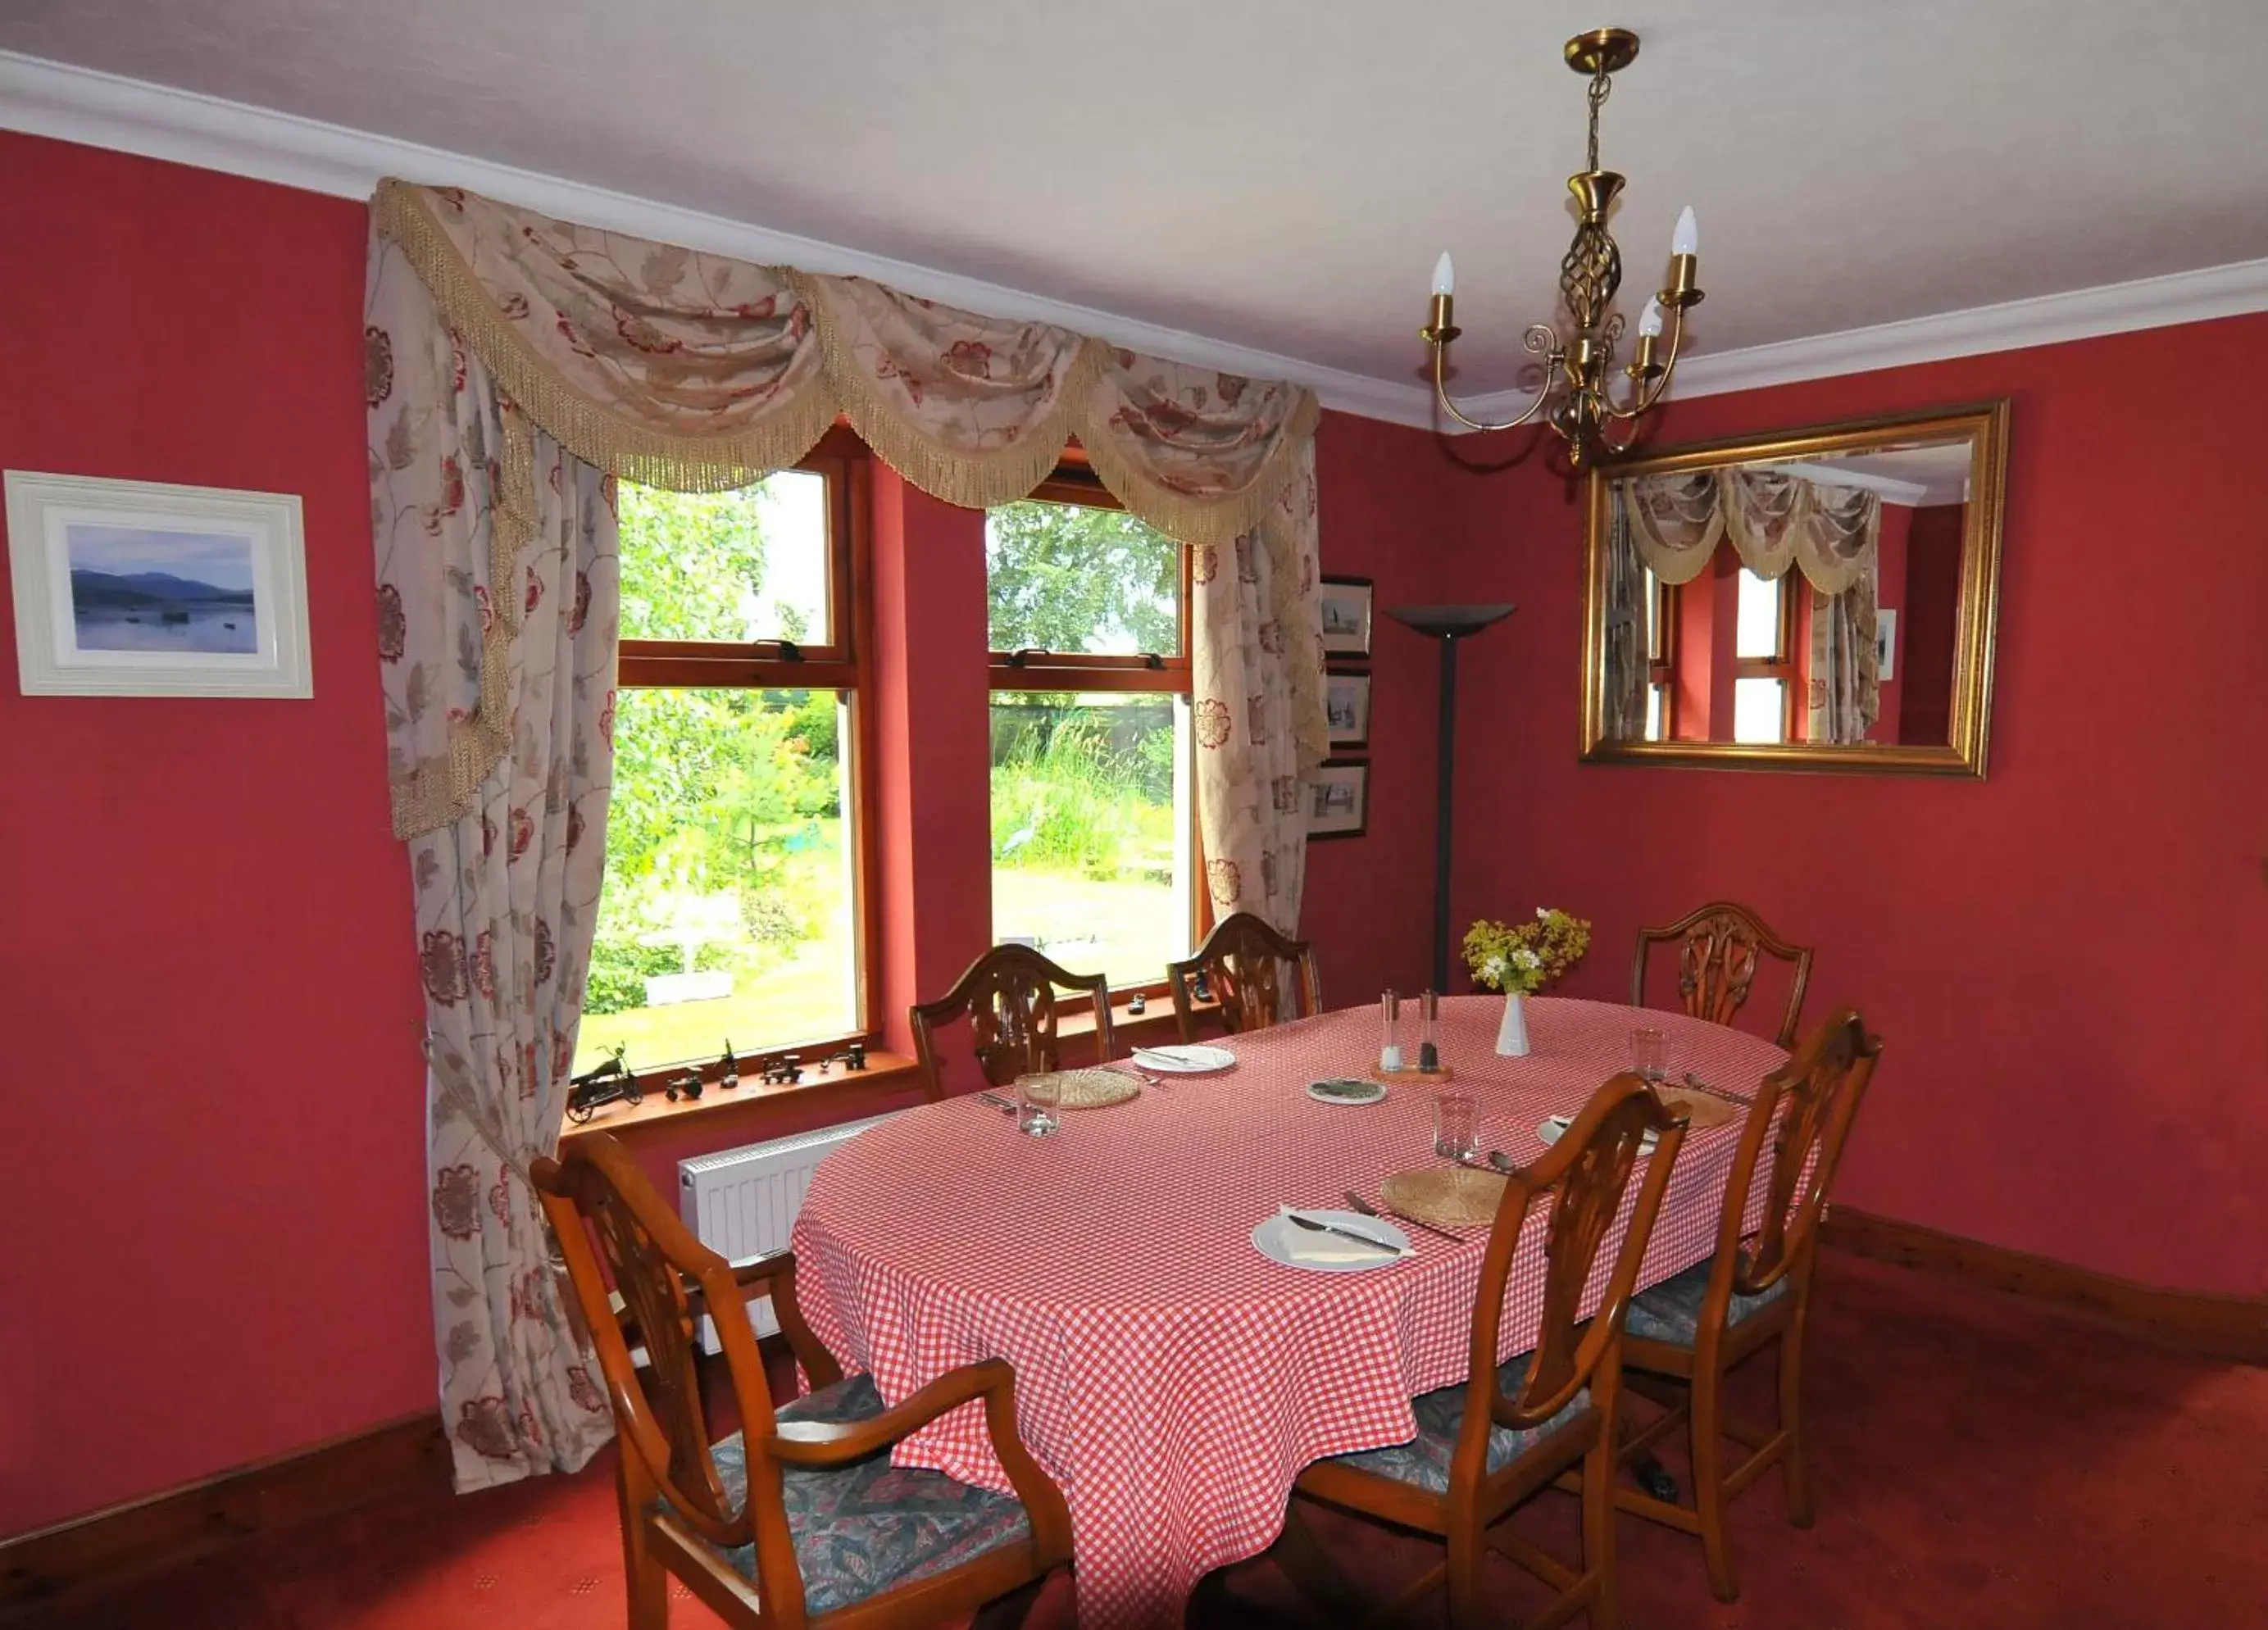 Other, Dining Area in Home Farm Bed and Breakfast